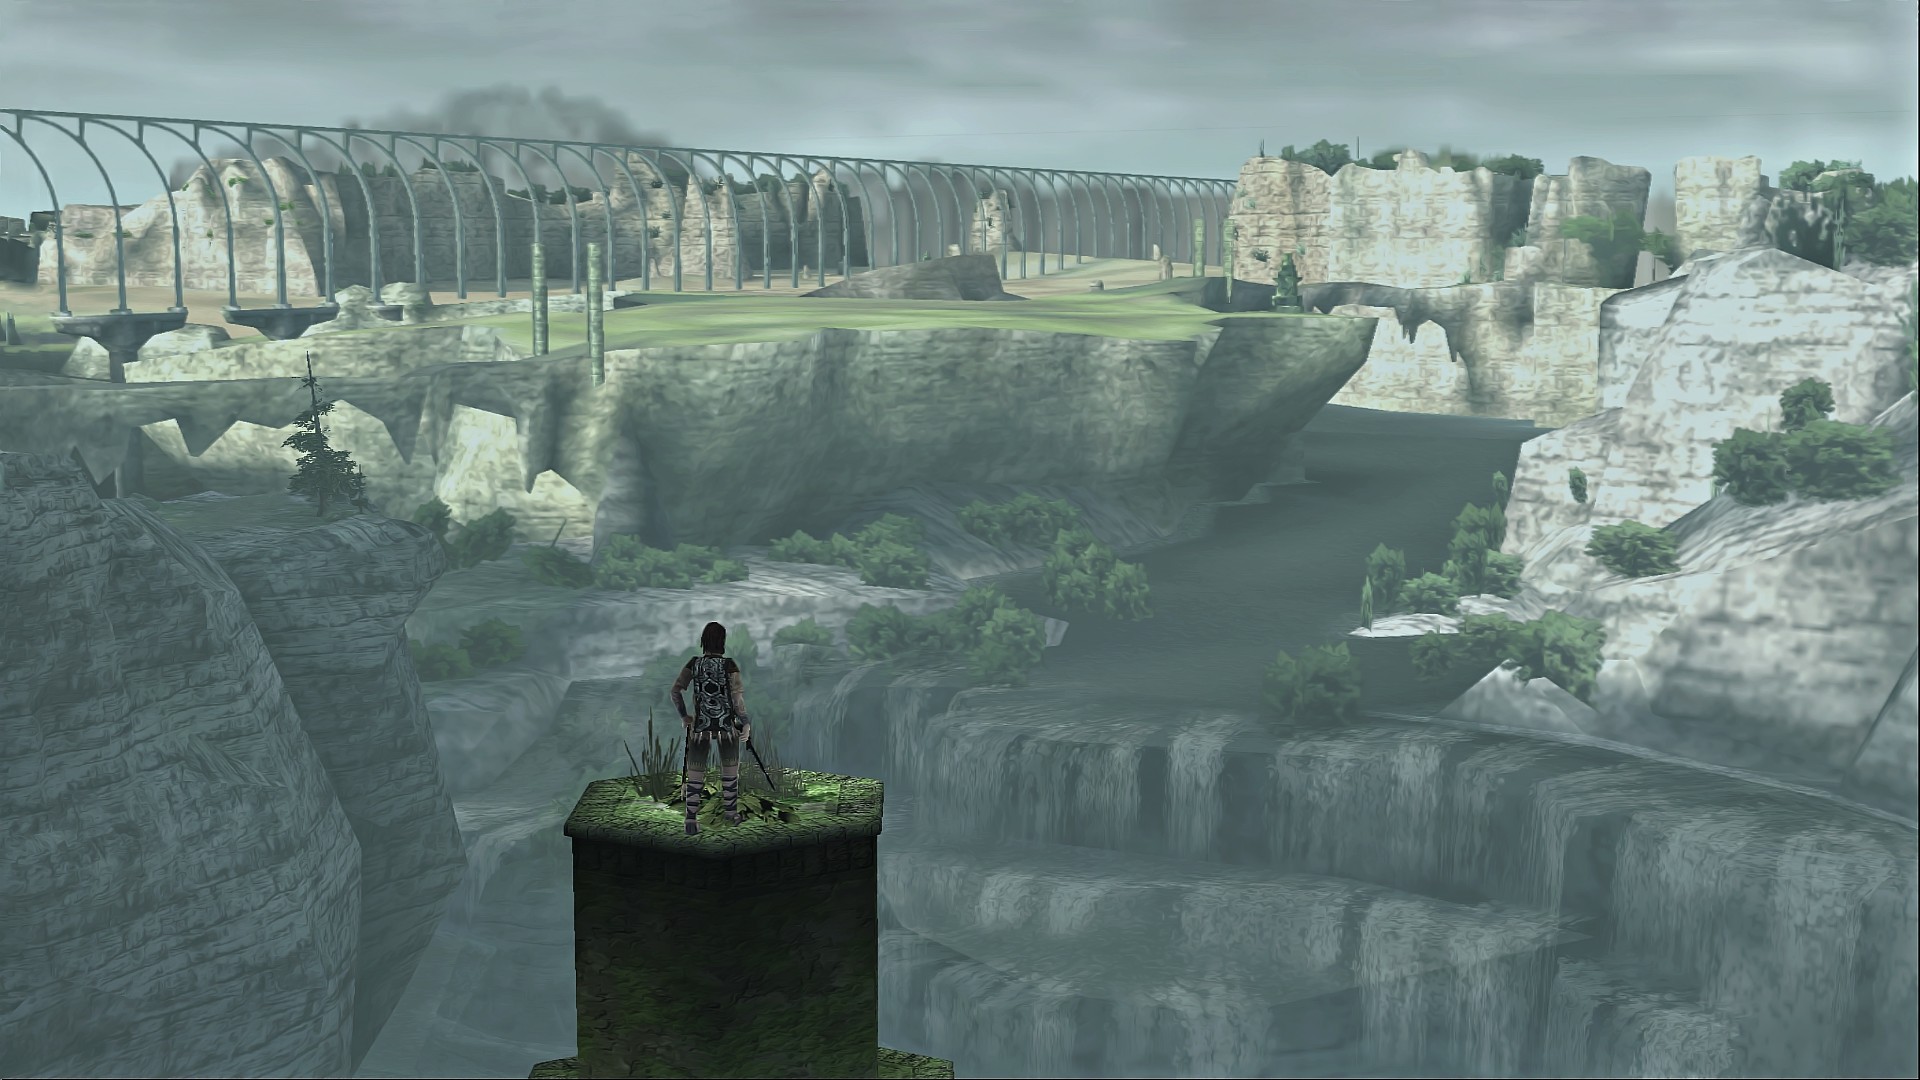 Shadow of the colossus pc background - automotivejord